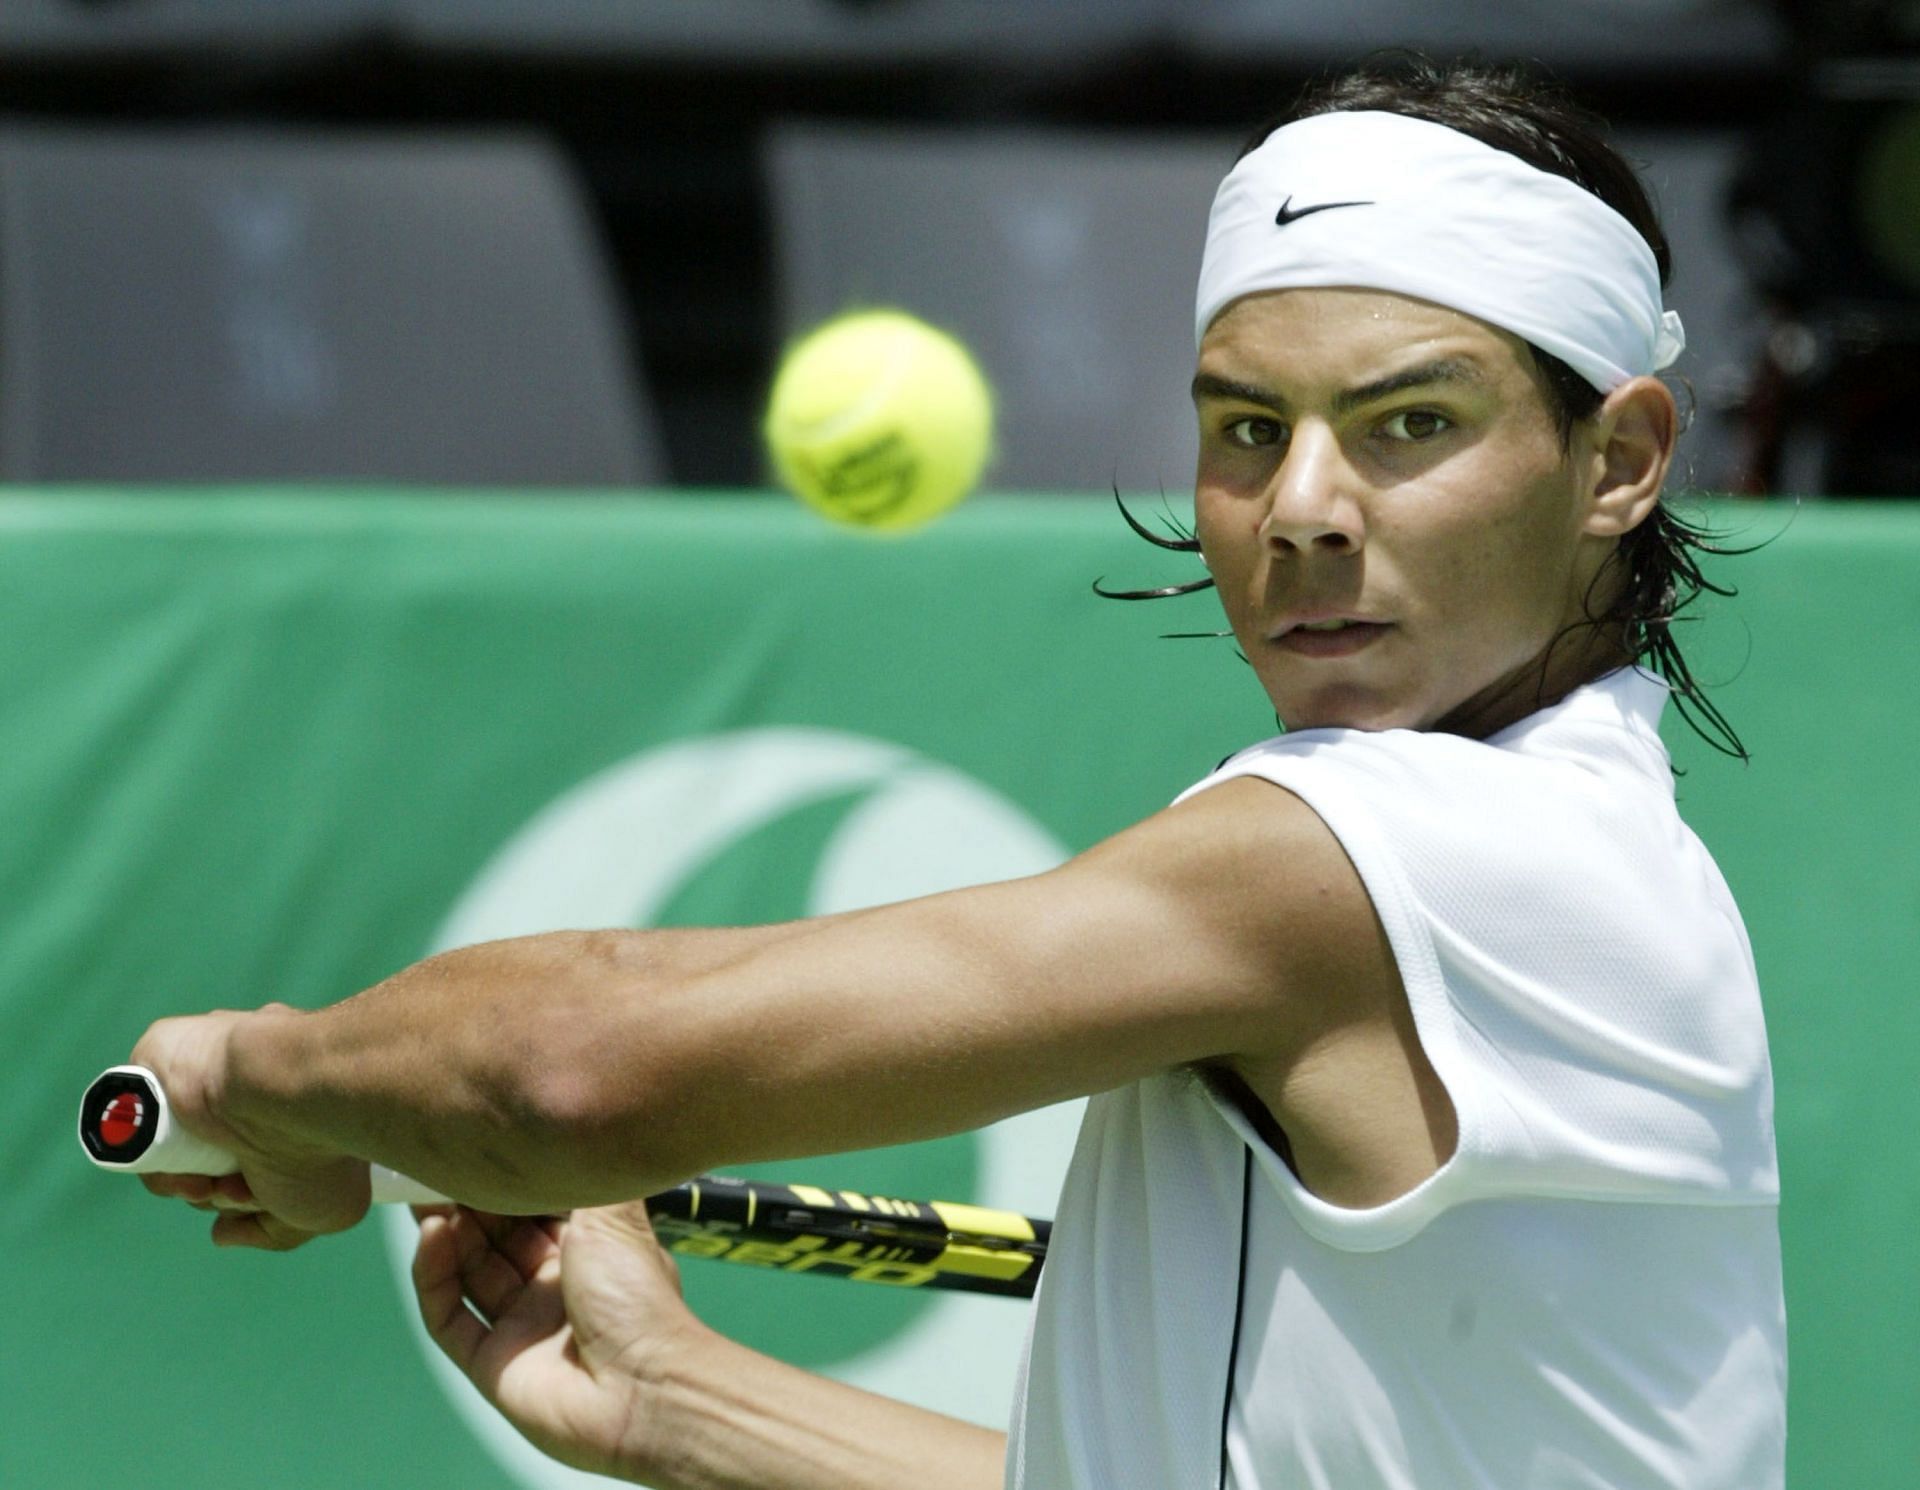 Rafael Nadal during his semifinal match at the 2004 Heineken Open in Auckland